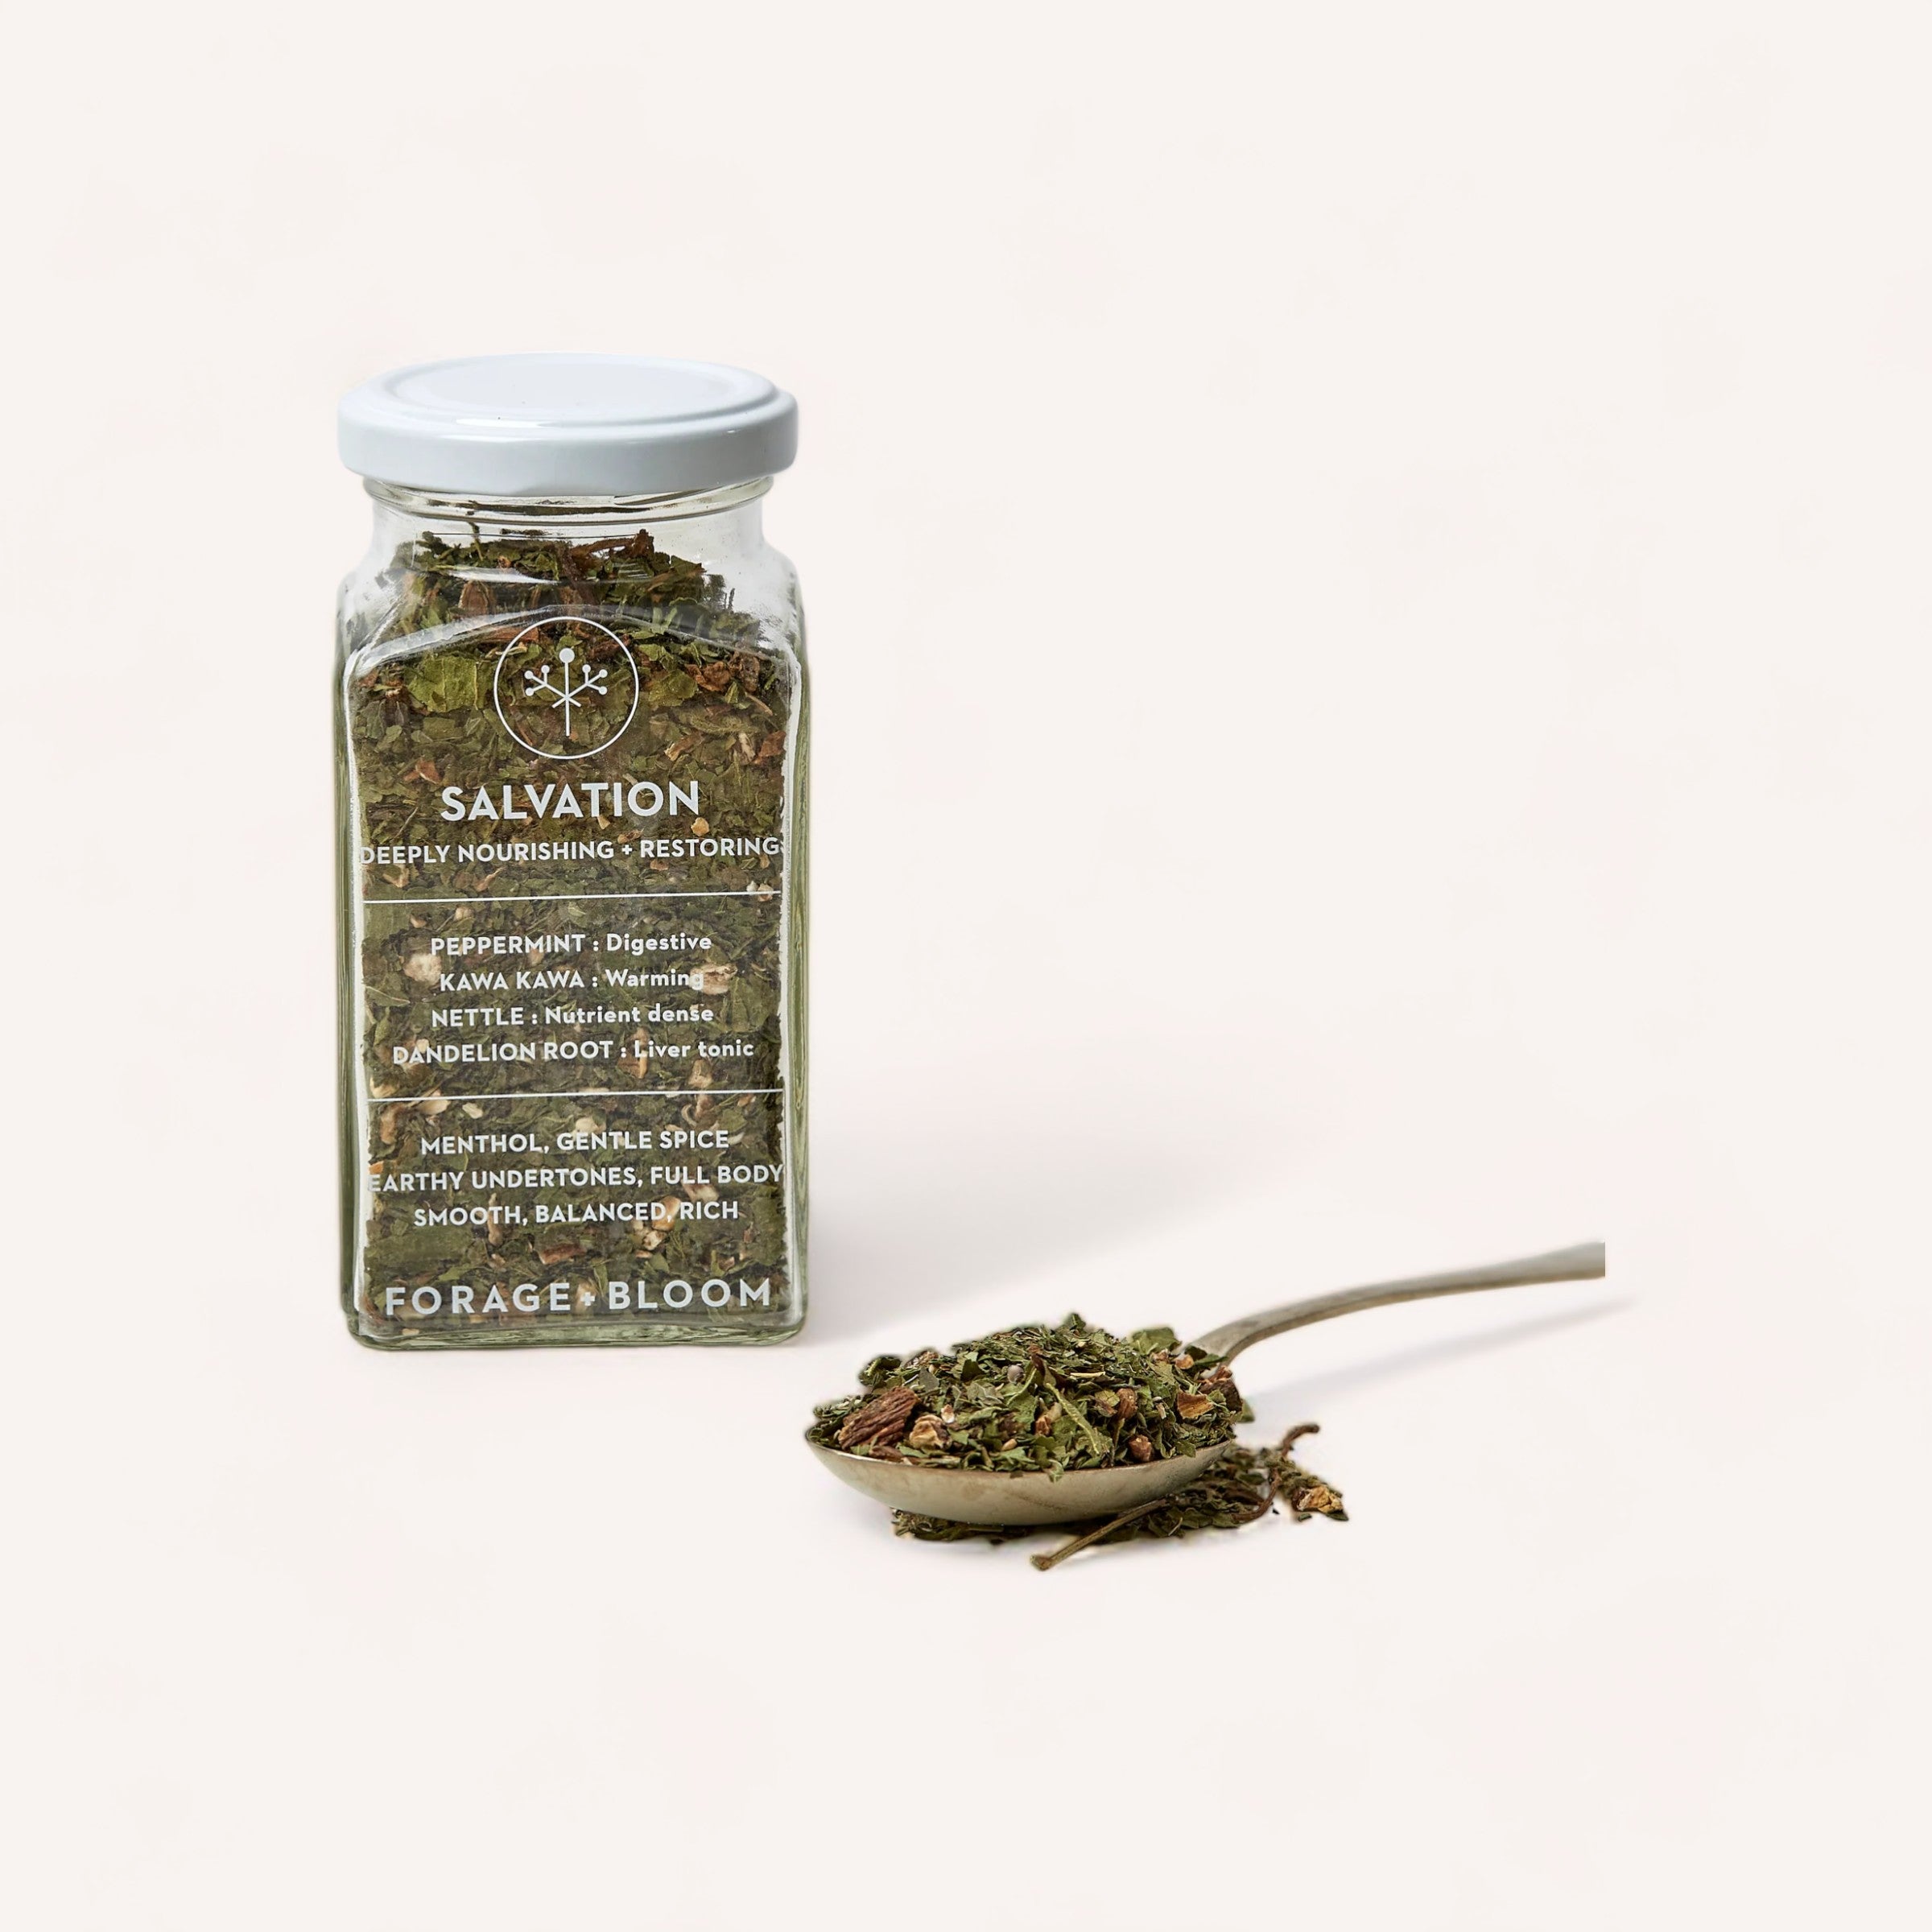 A jar of 'Salvation Tea' by Forage + Bloom digestive herbal tea with a spoonful of loose leaf blend beside it on a white background.